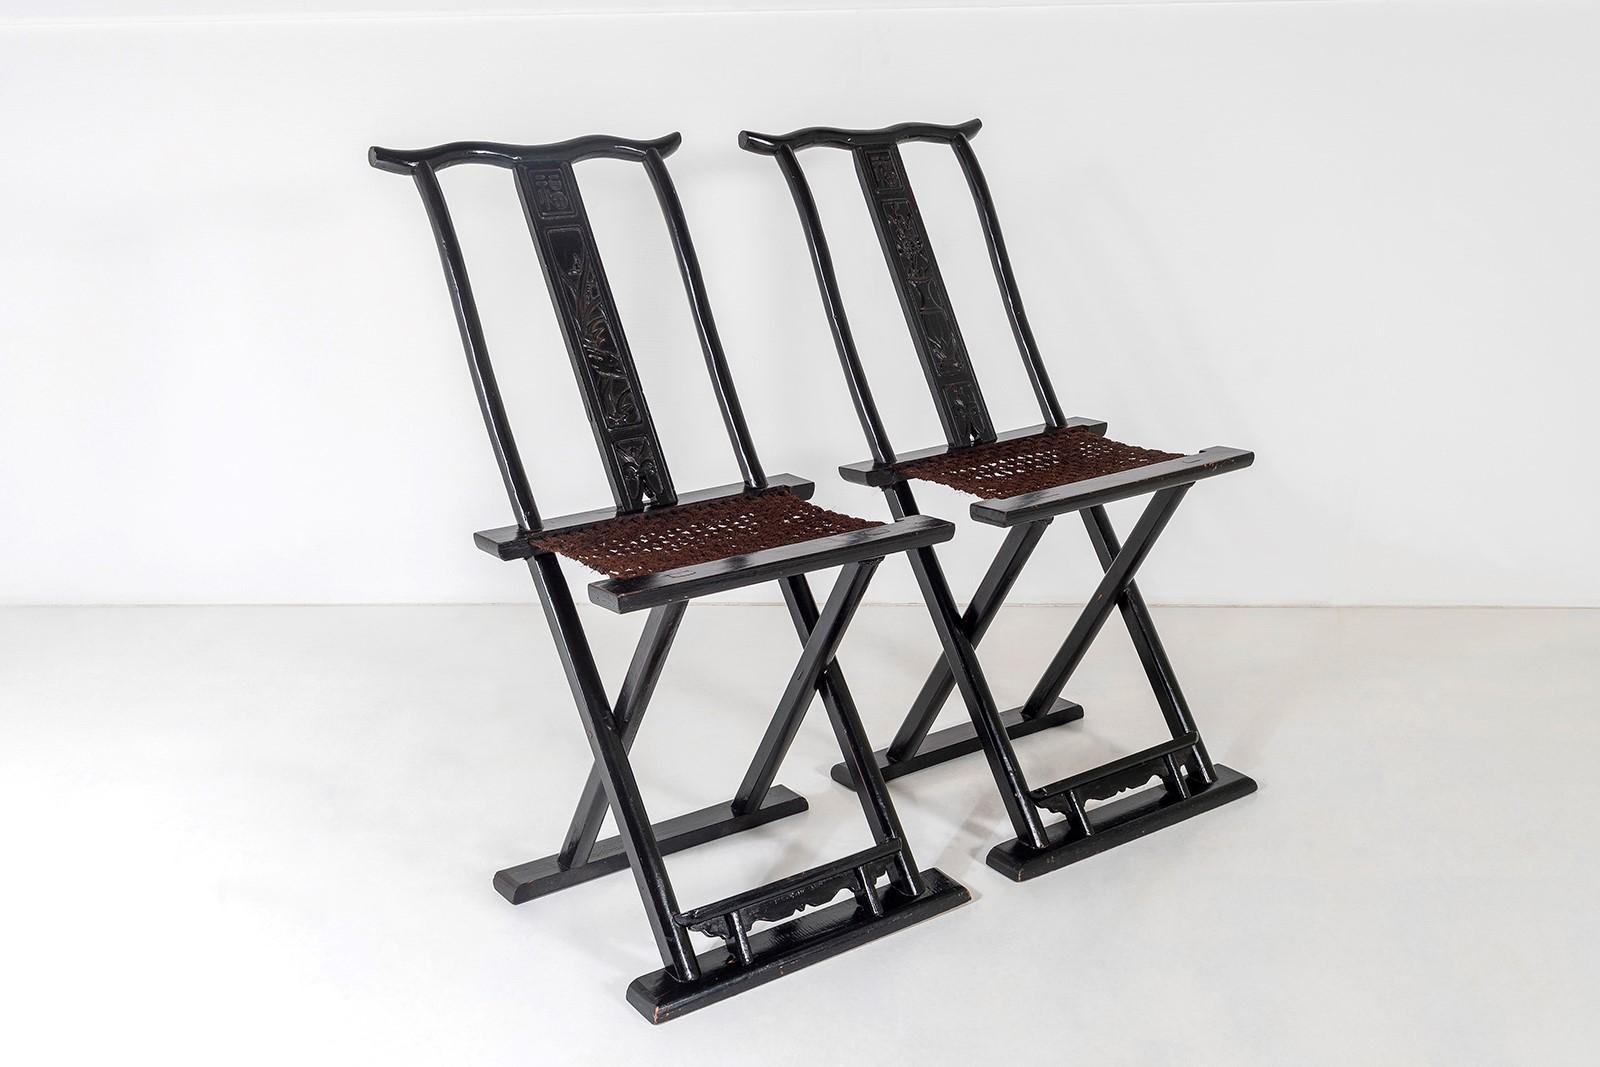 A characterful pair of  late 19th Century, early 20th Century Chinese Folding Travel Chairs.  Great form and colour, with ebonised frames and original woven nett seats.
A simplistic, yet highly decorative pair with good geometry, well made with